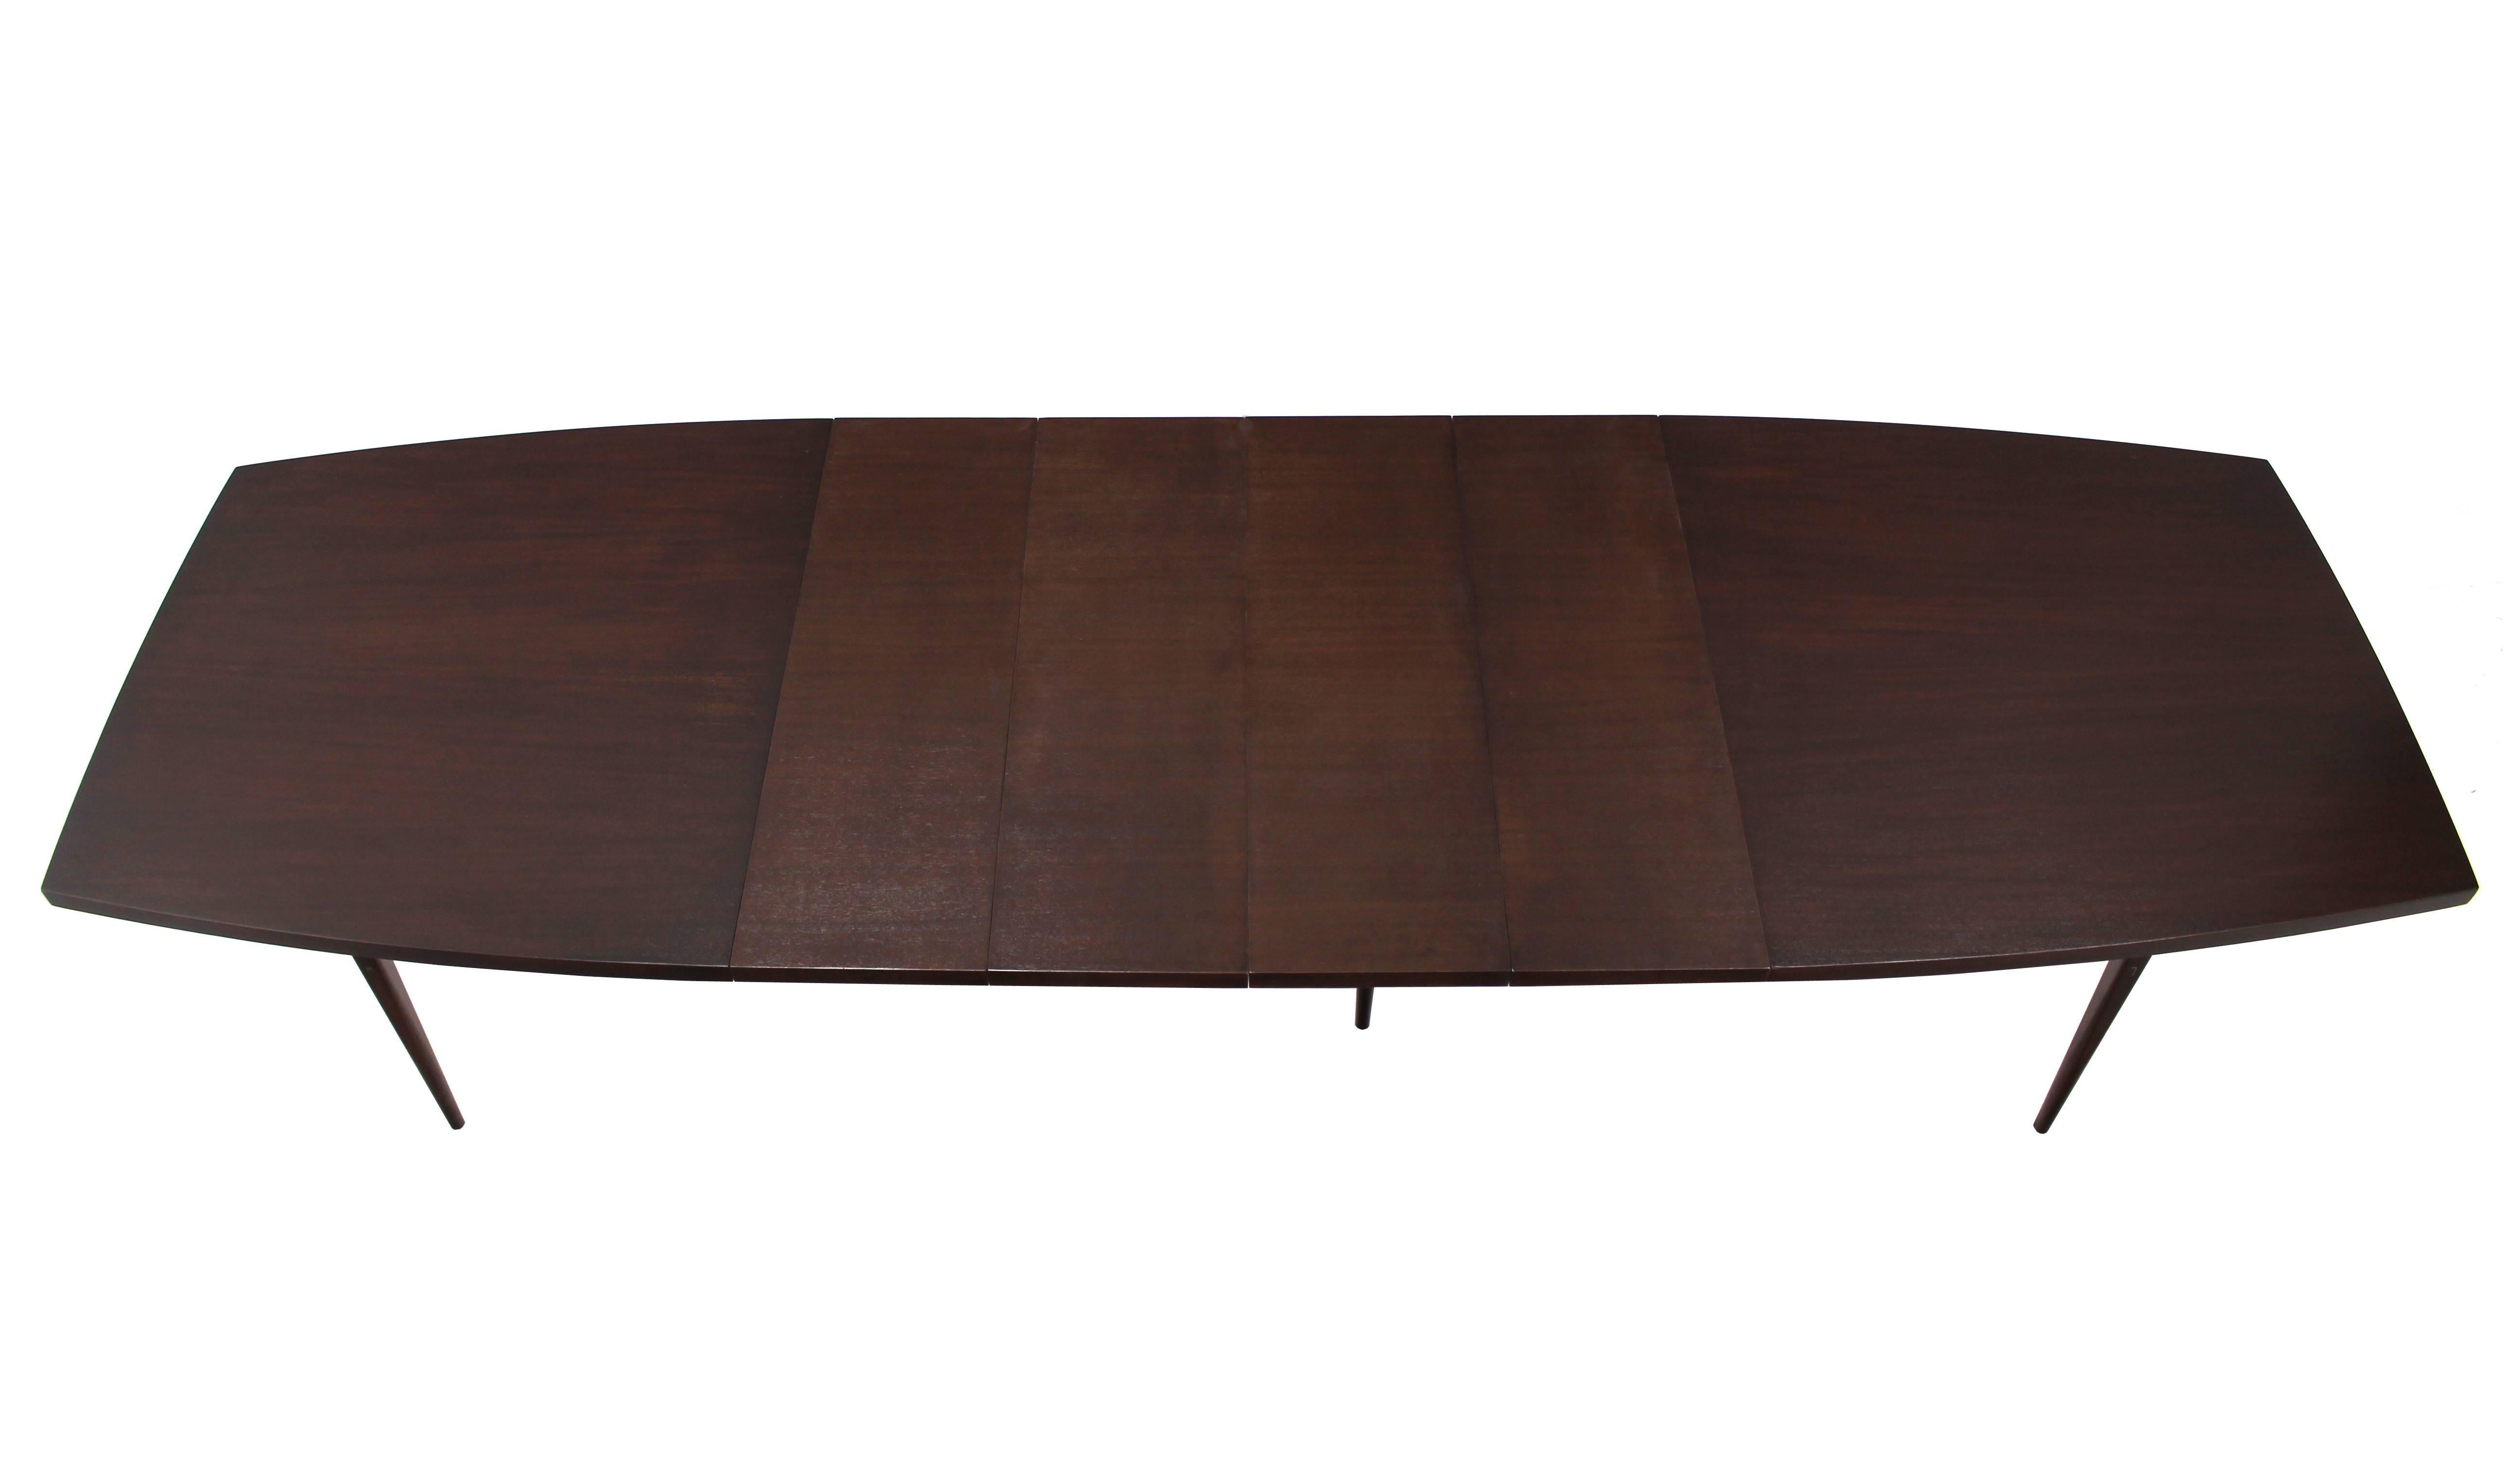 American Paul McCobb Calvin Mid-Century Modern Dining Table 4 Extension Leaves Boat Shape